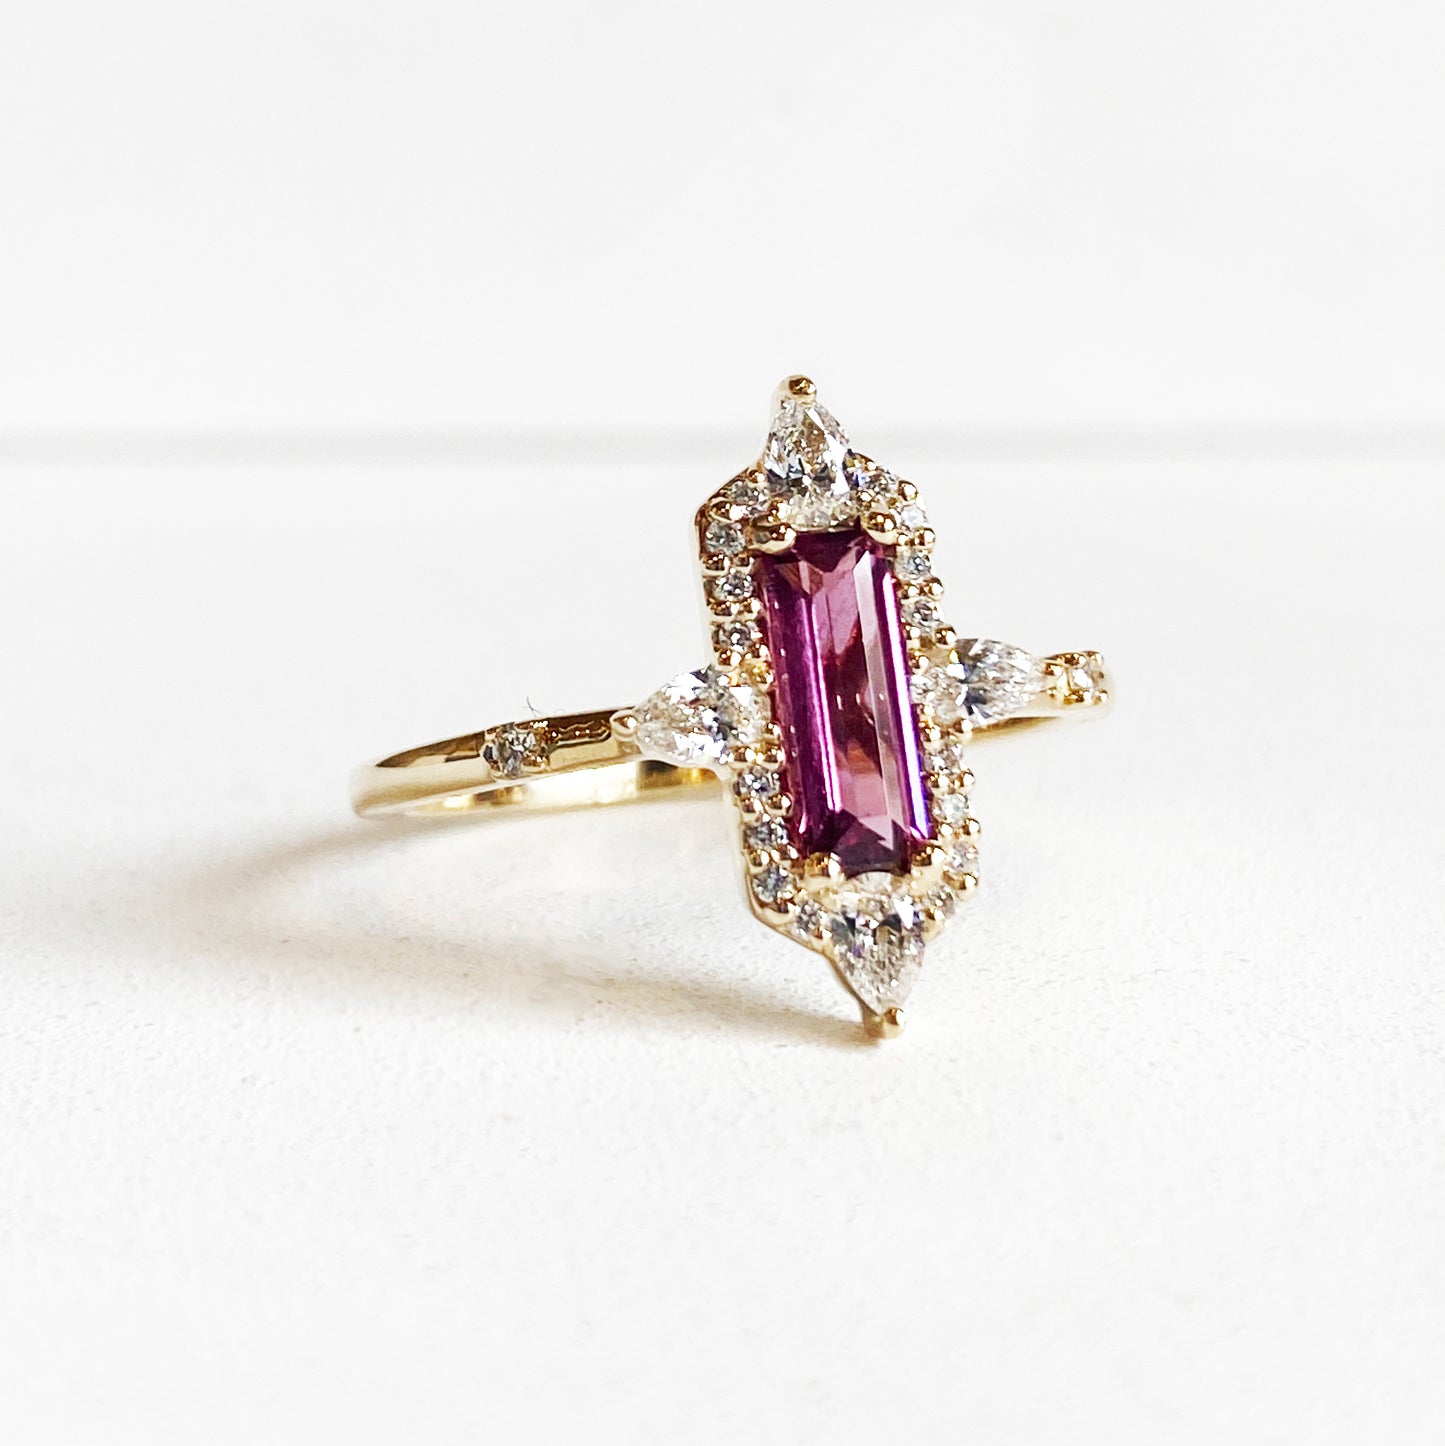 Maria Baguette Ring with Diamond Halo